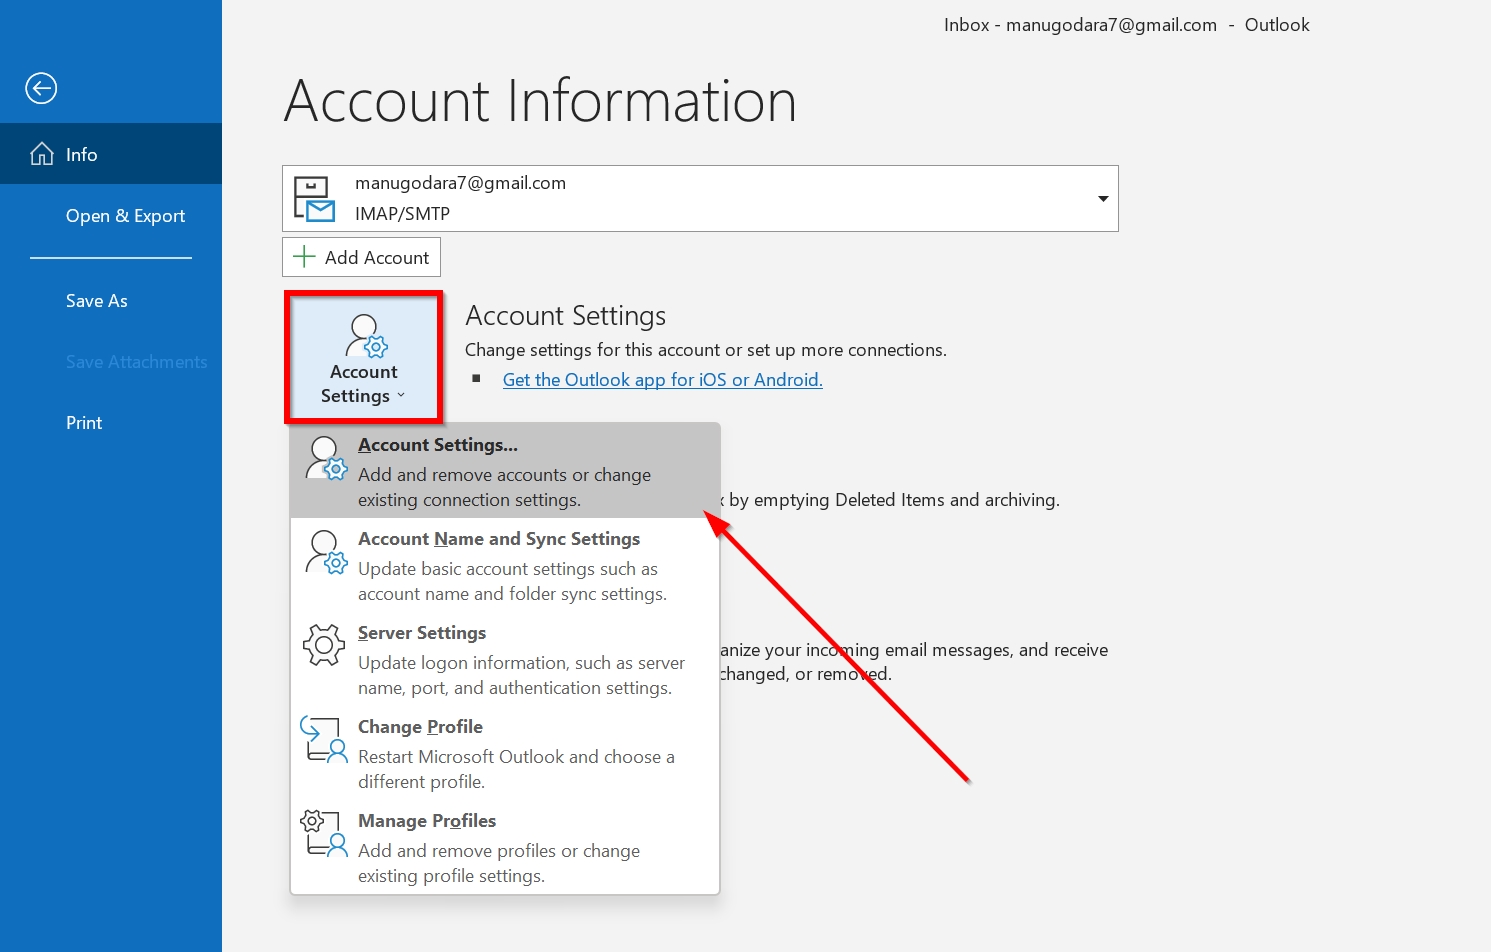 Account settings page in Outlook.